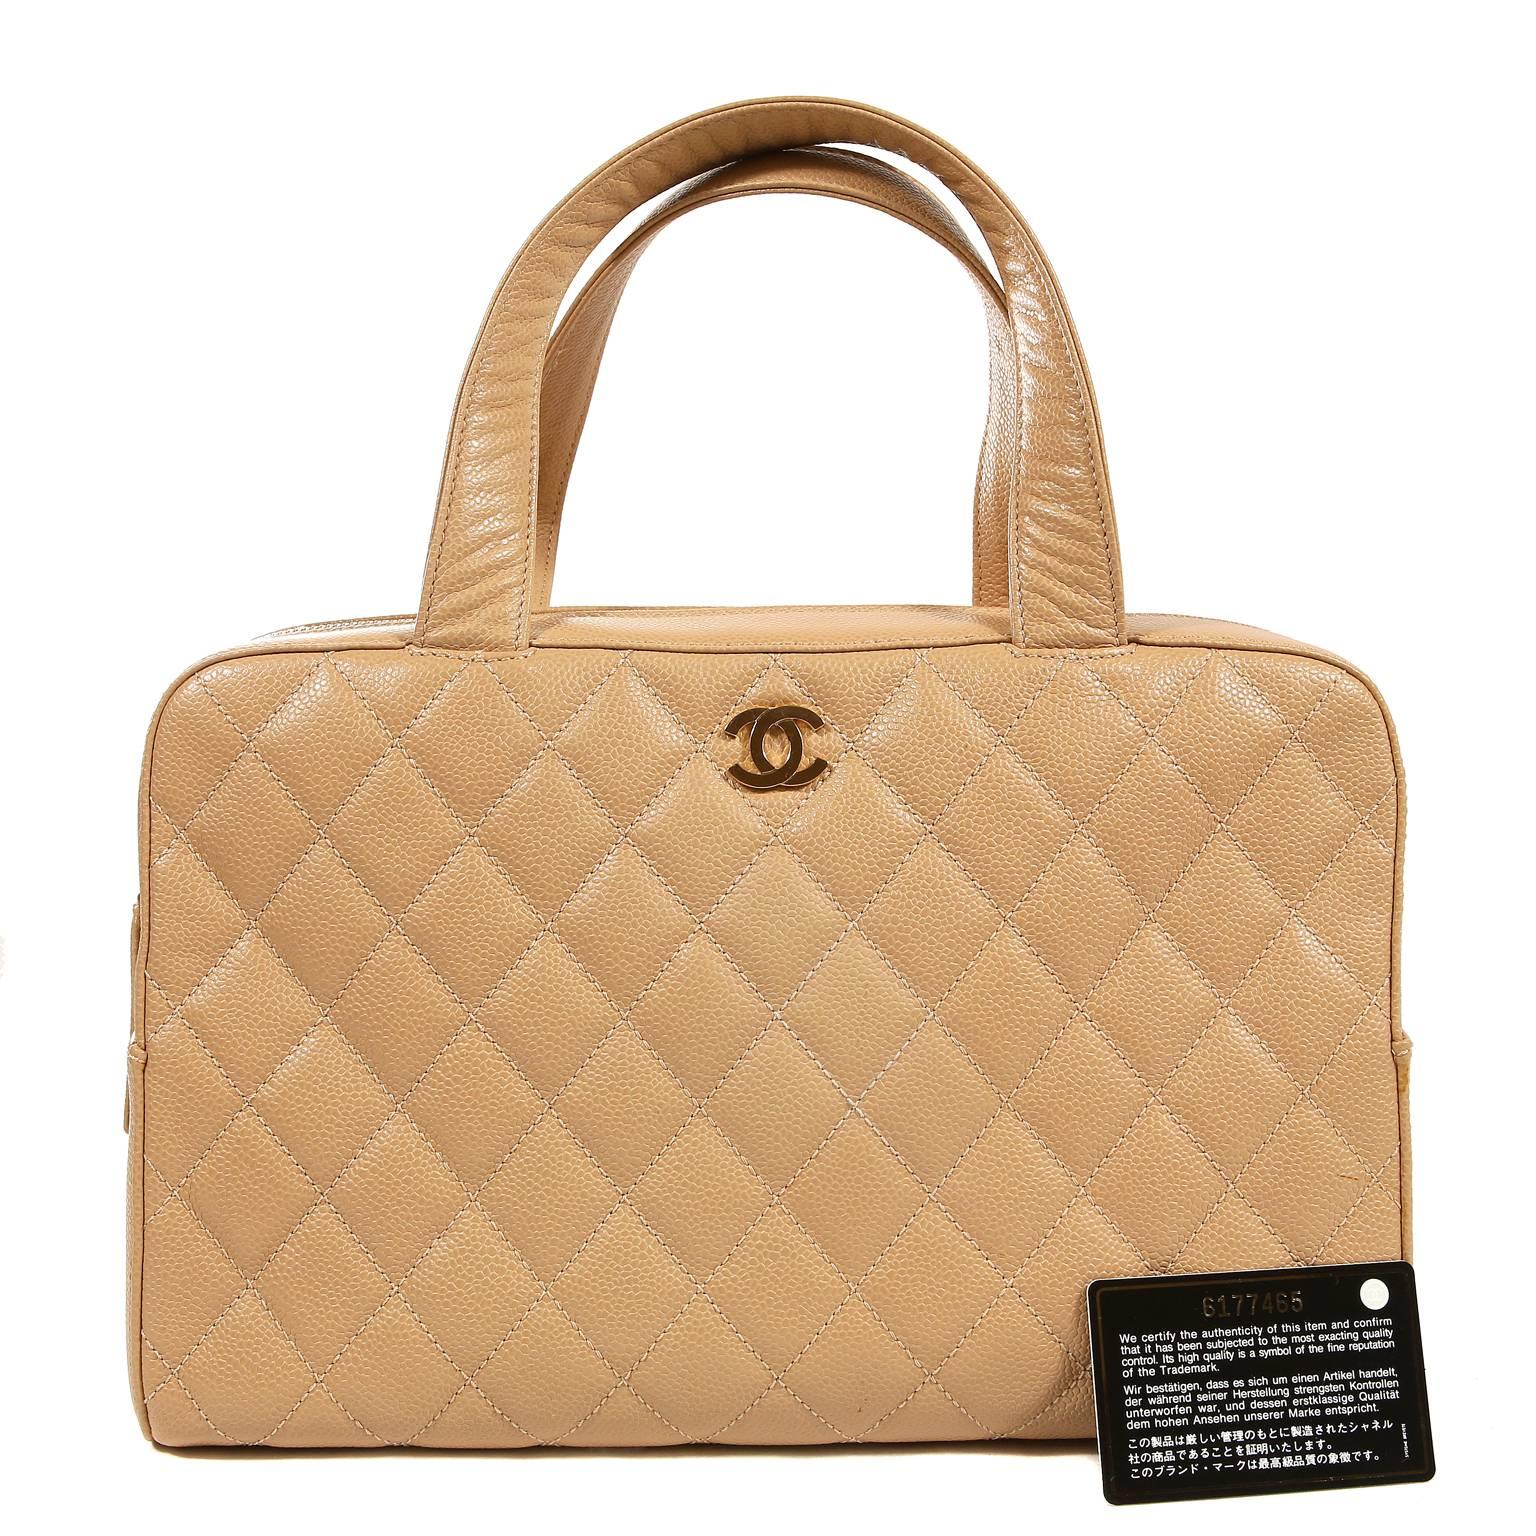 Chanel Beige Caviar Leather Quilted Day Bag Satchel 9